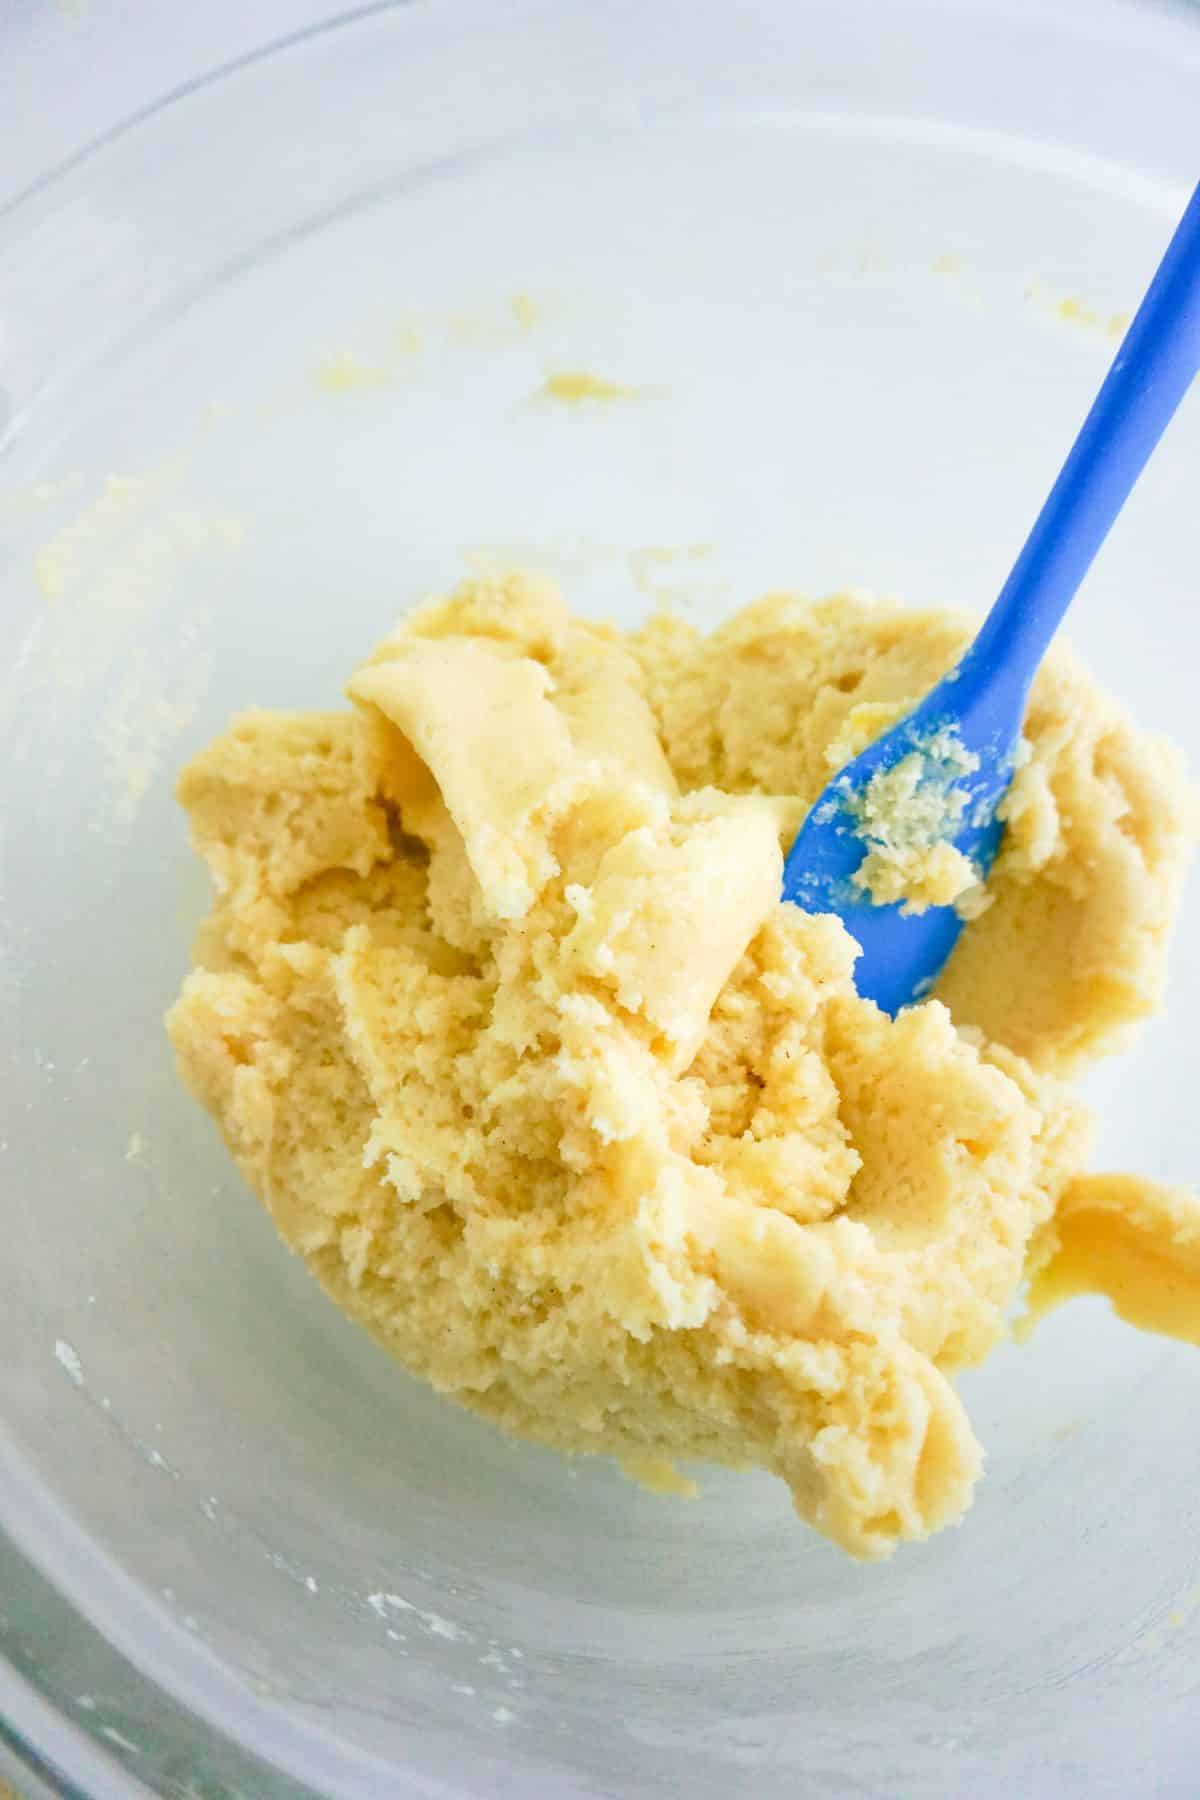 Chilled cookie dough and a blue spatula in a glass bowl